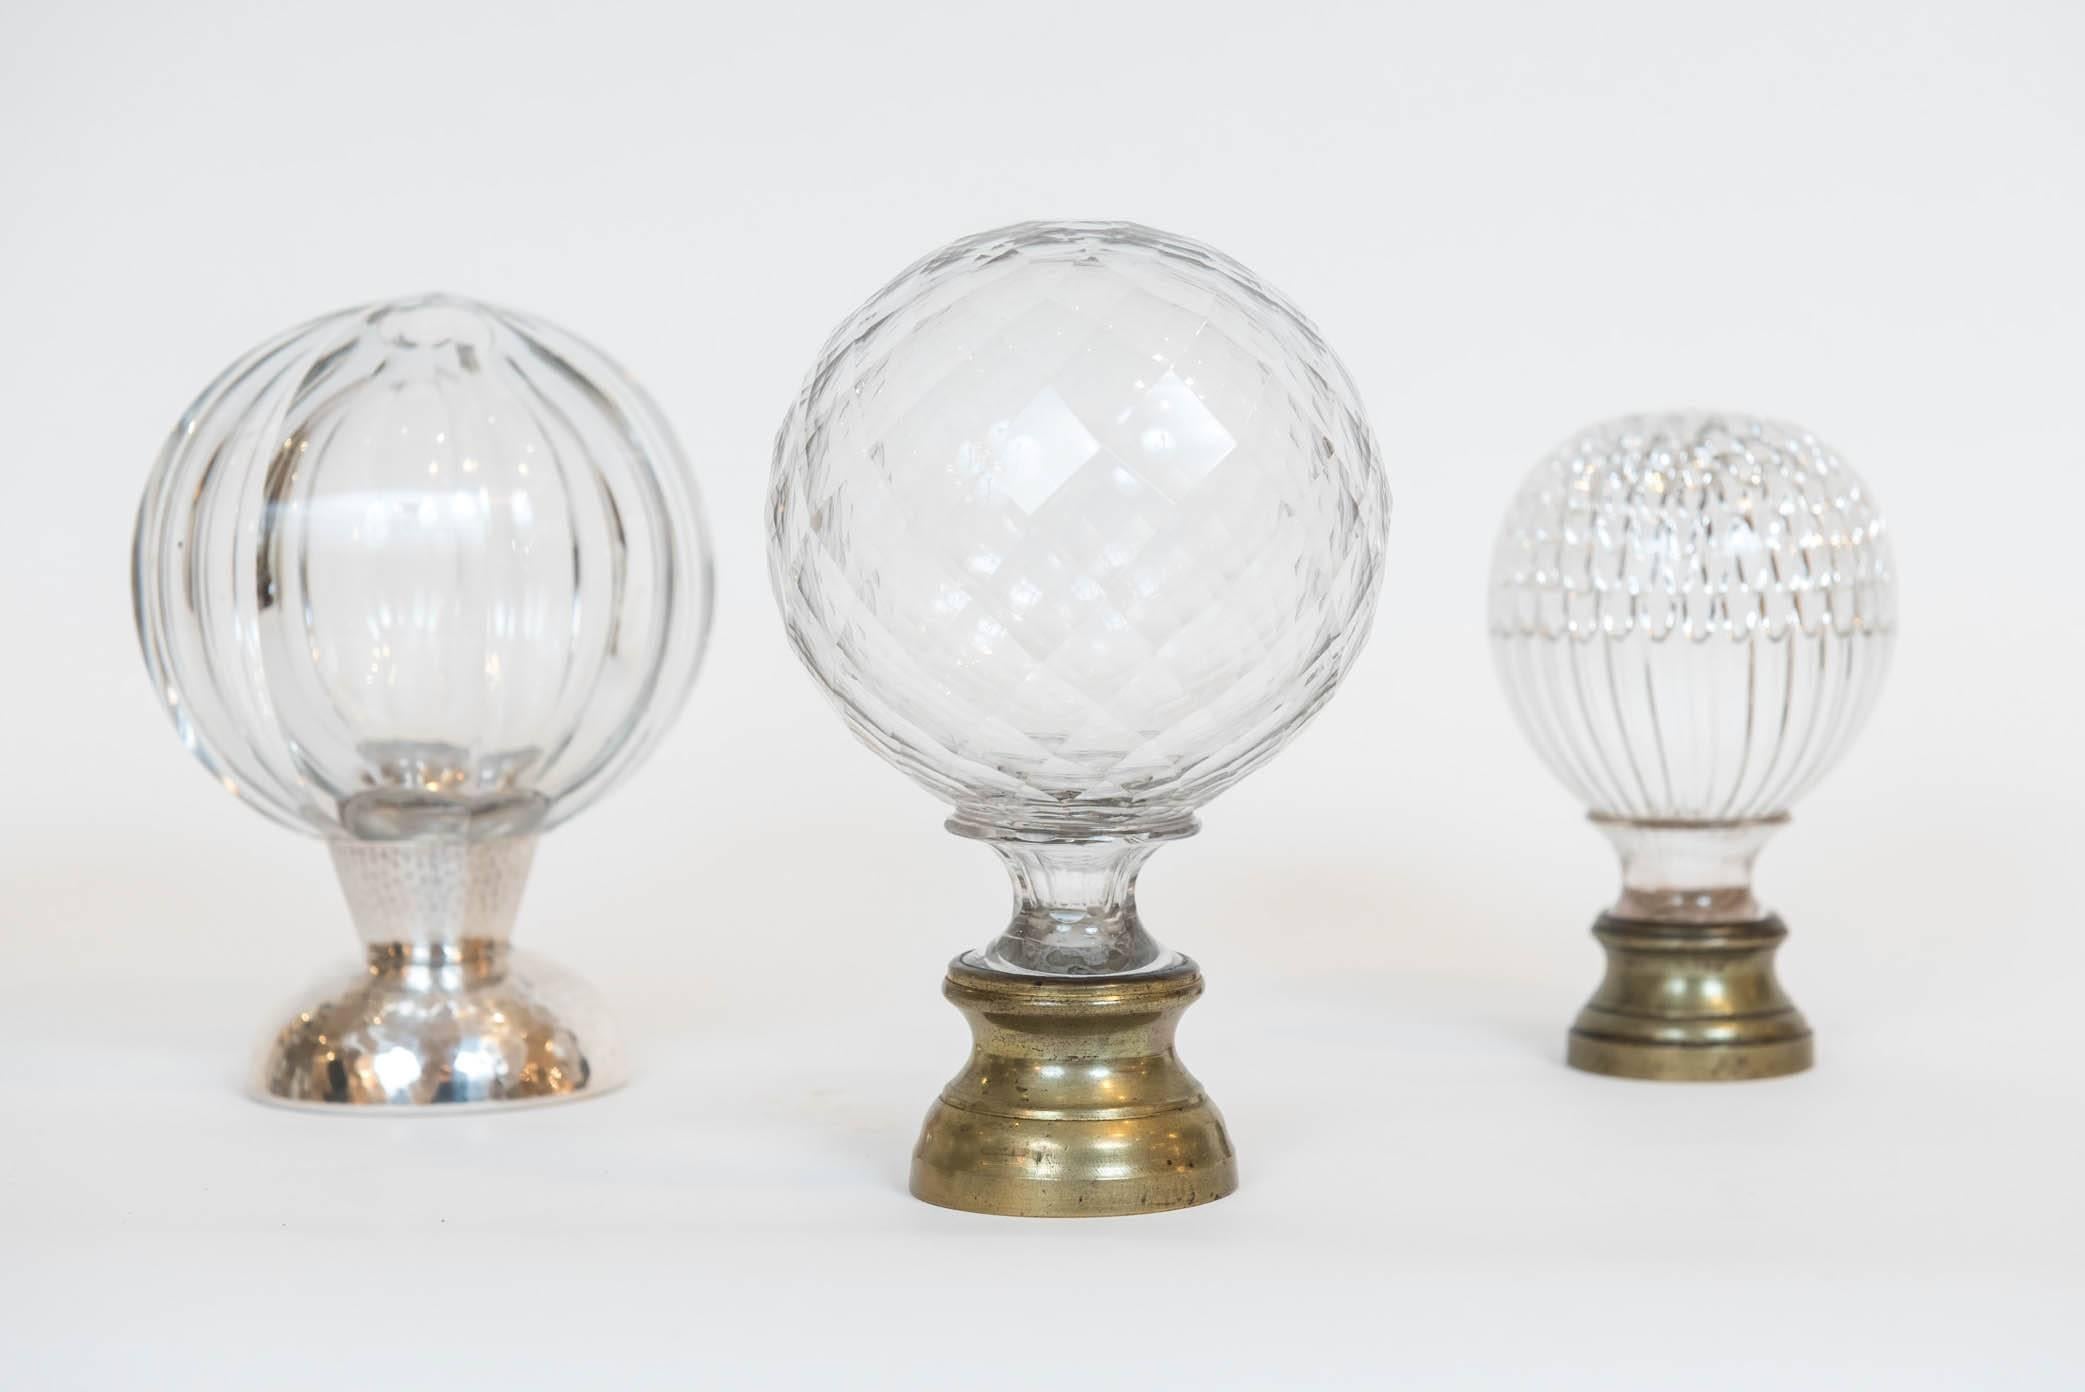 This grouping of gorgeous blown glass finials from one person’s collection are great gifts,
collectibles, or decorative objects for traditional, contemporary or modern rooms!
Two available. The second and fifth from the left are still available.